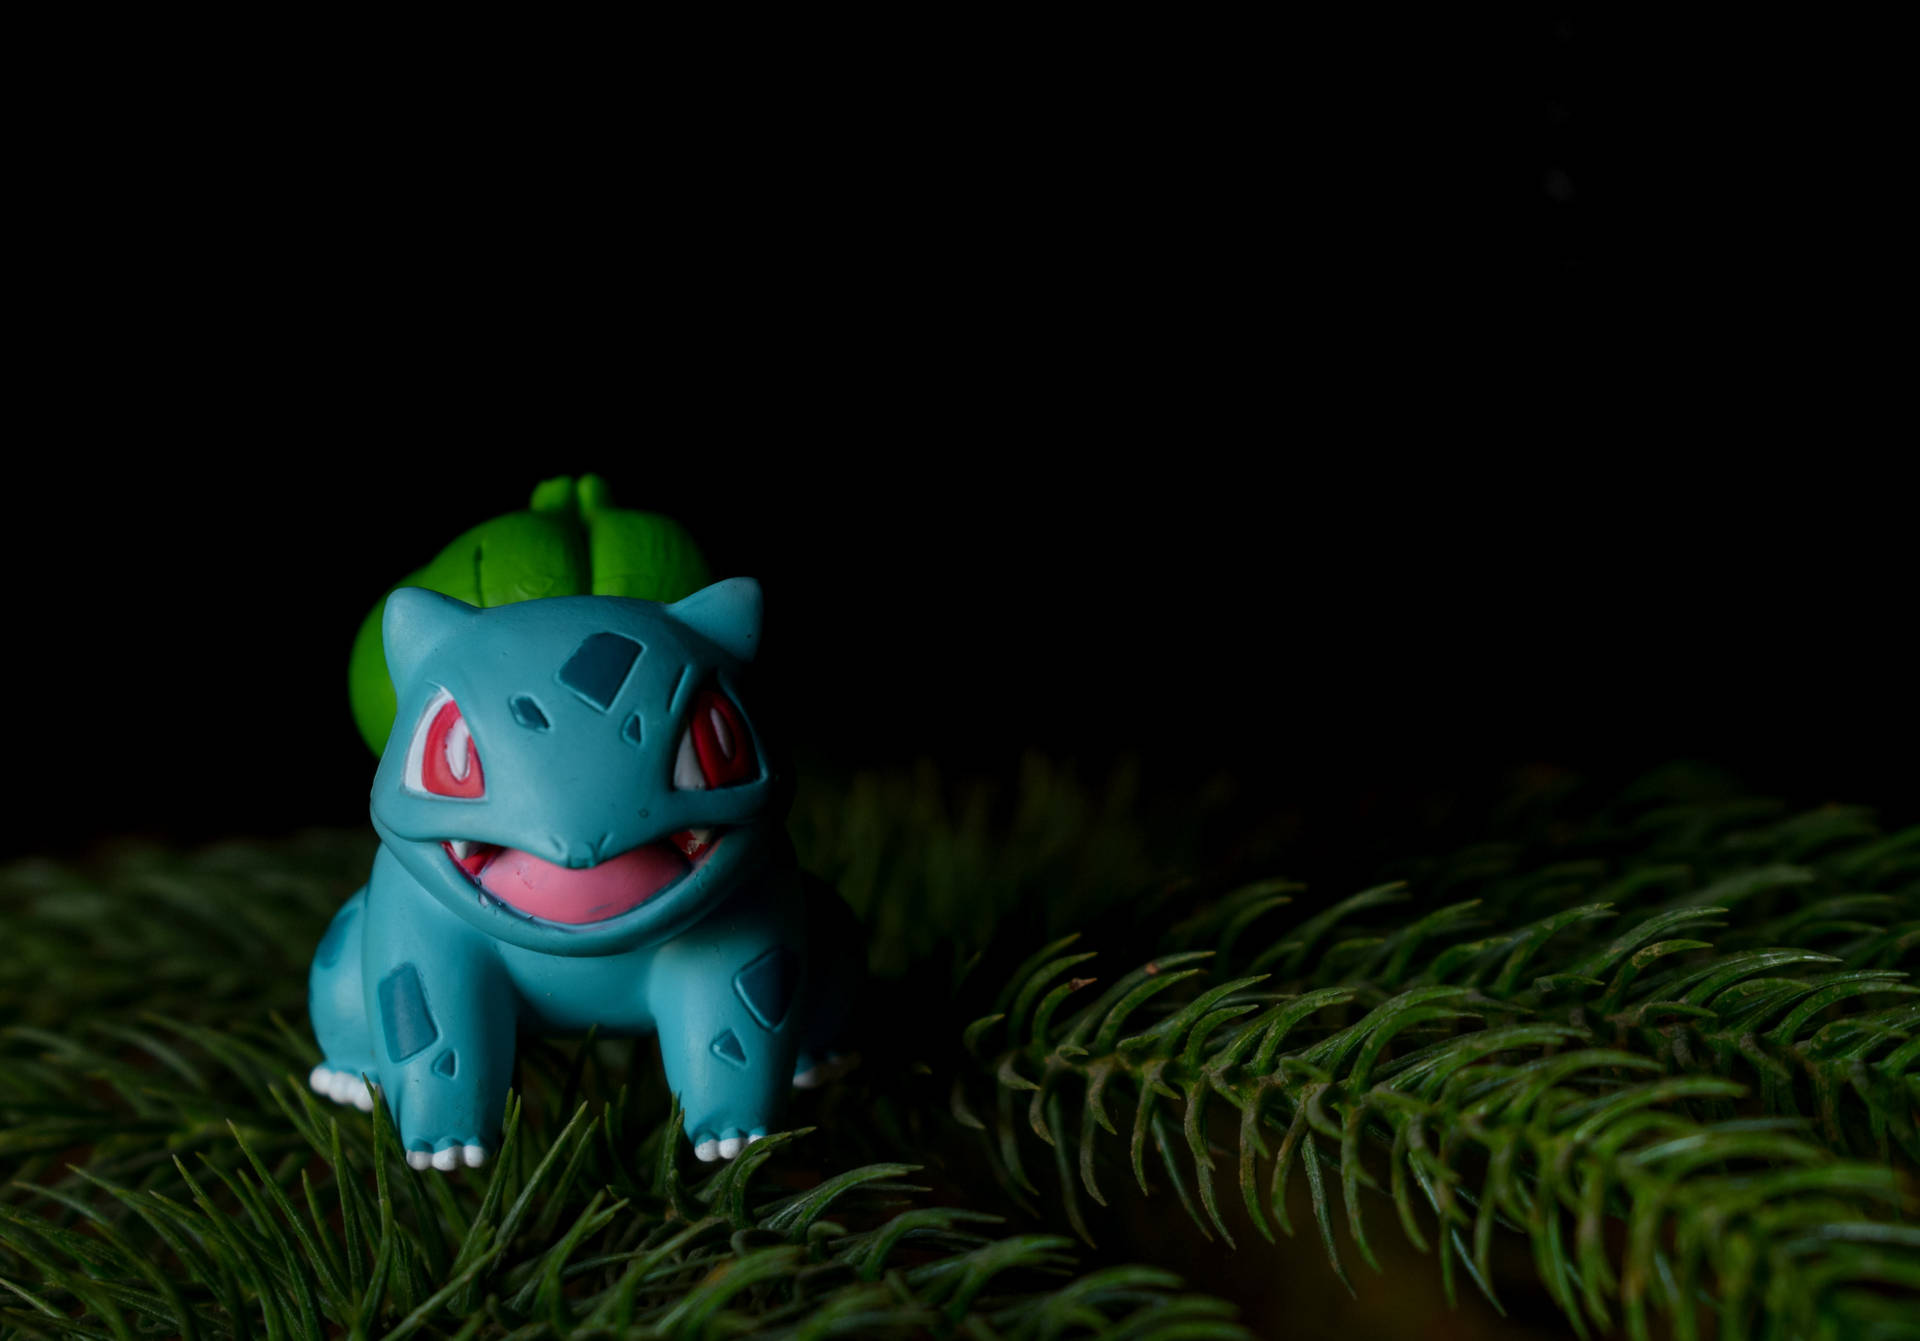 Cuddly Bulbasaur Toy Enjoying a Snack in the Pine Forest Wallpaper